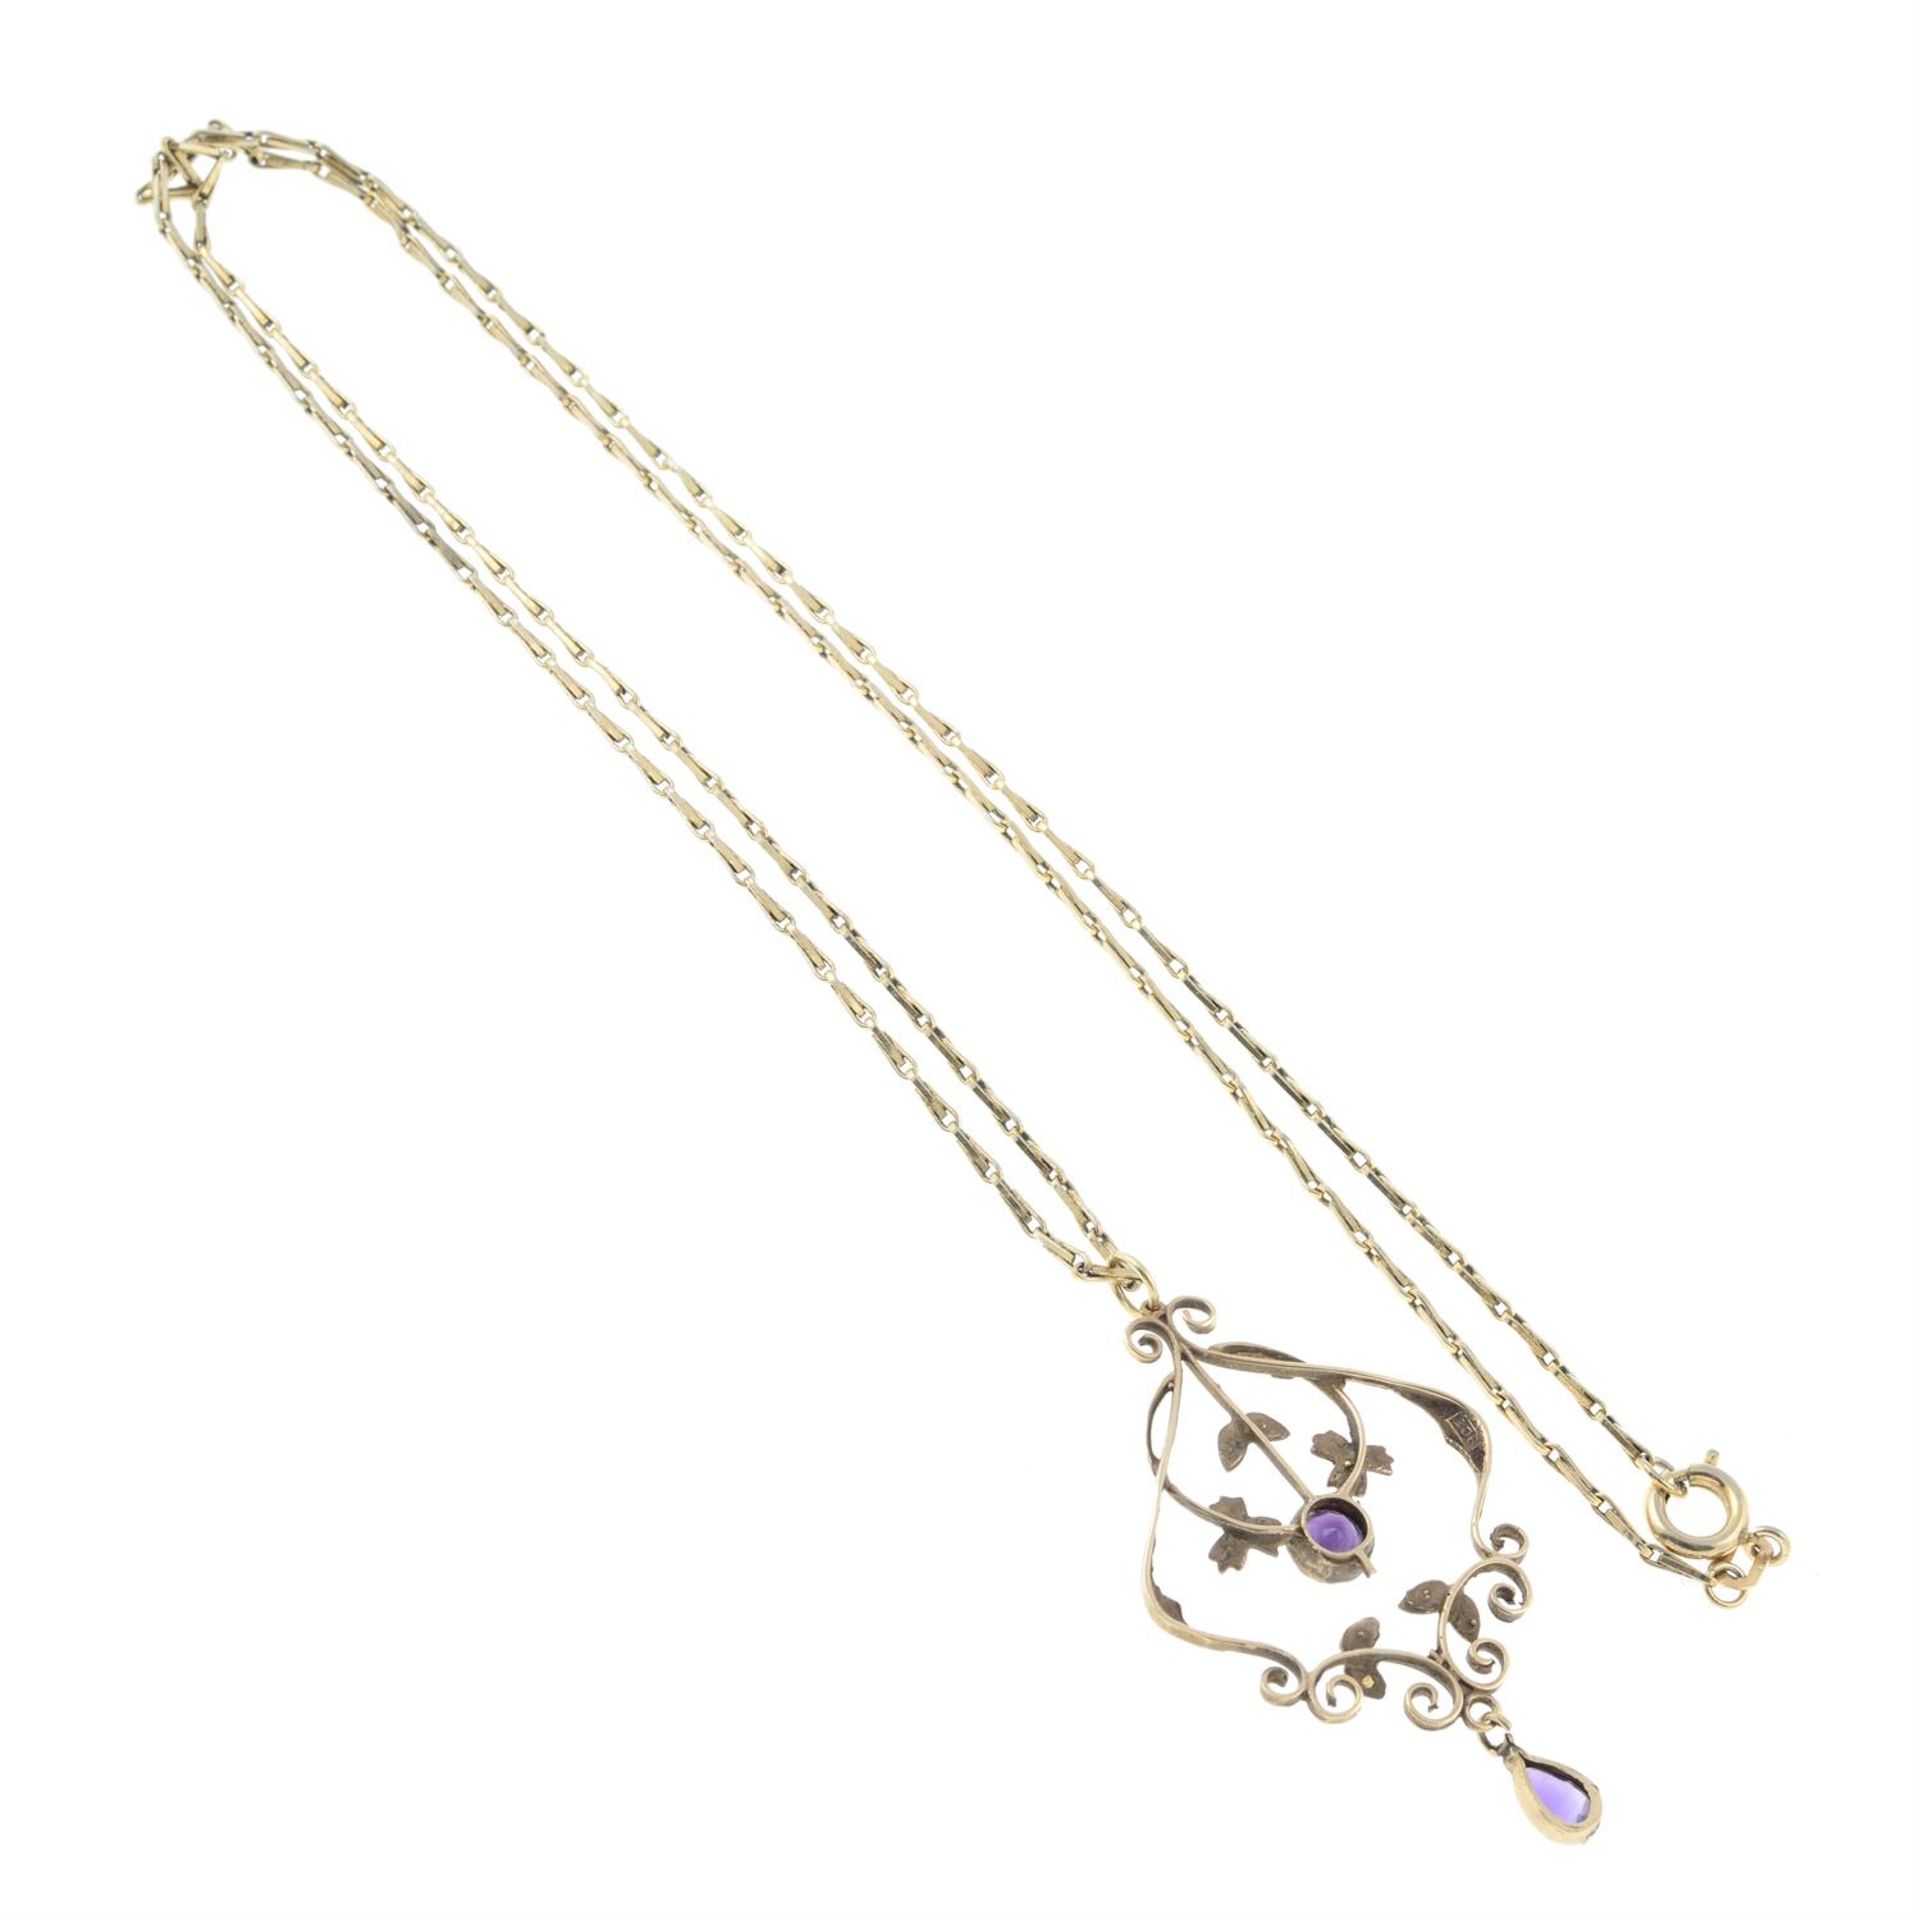 An early 20th century 9ct gold amethyst and seed pearl pendant, with base metal chain. - Image 2 of 2